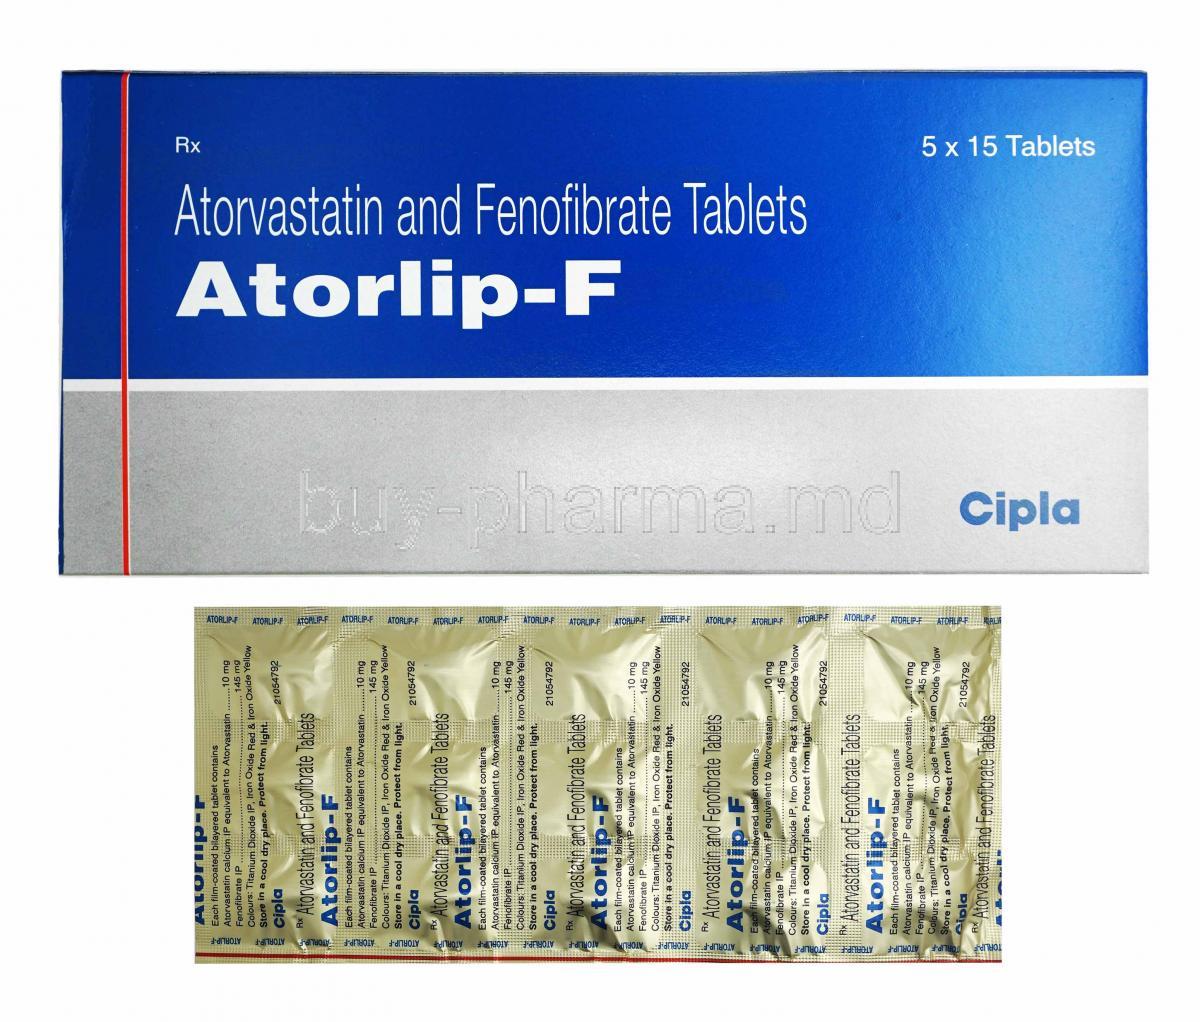 Atorlip-F, Atorvastatin and Fenofibrate box and tablets